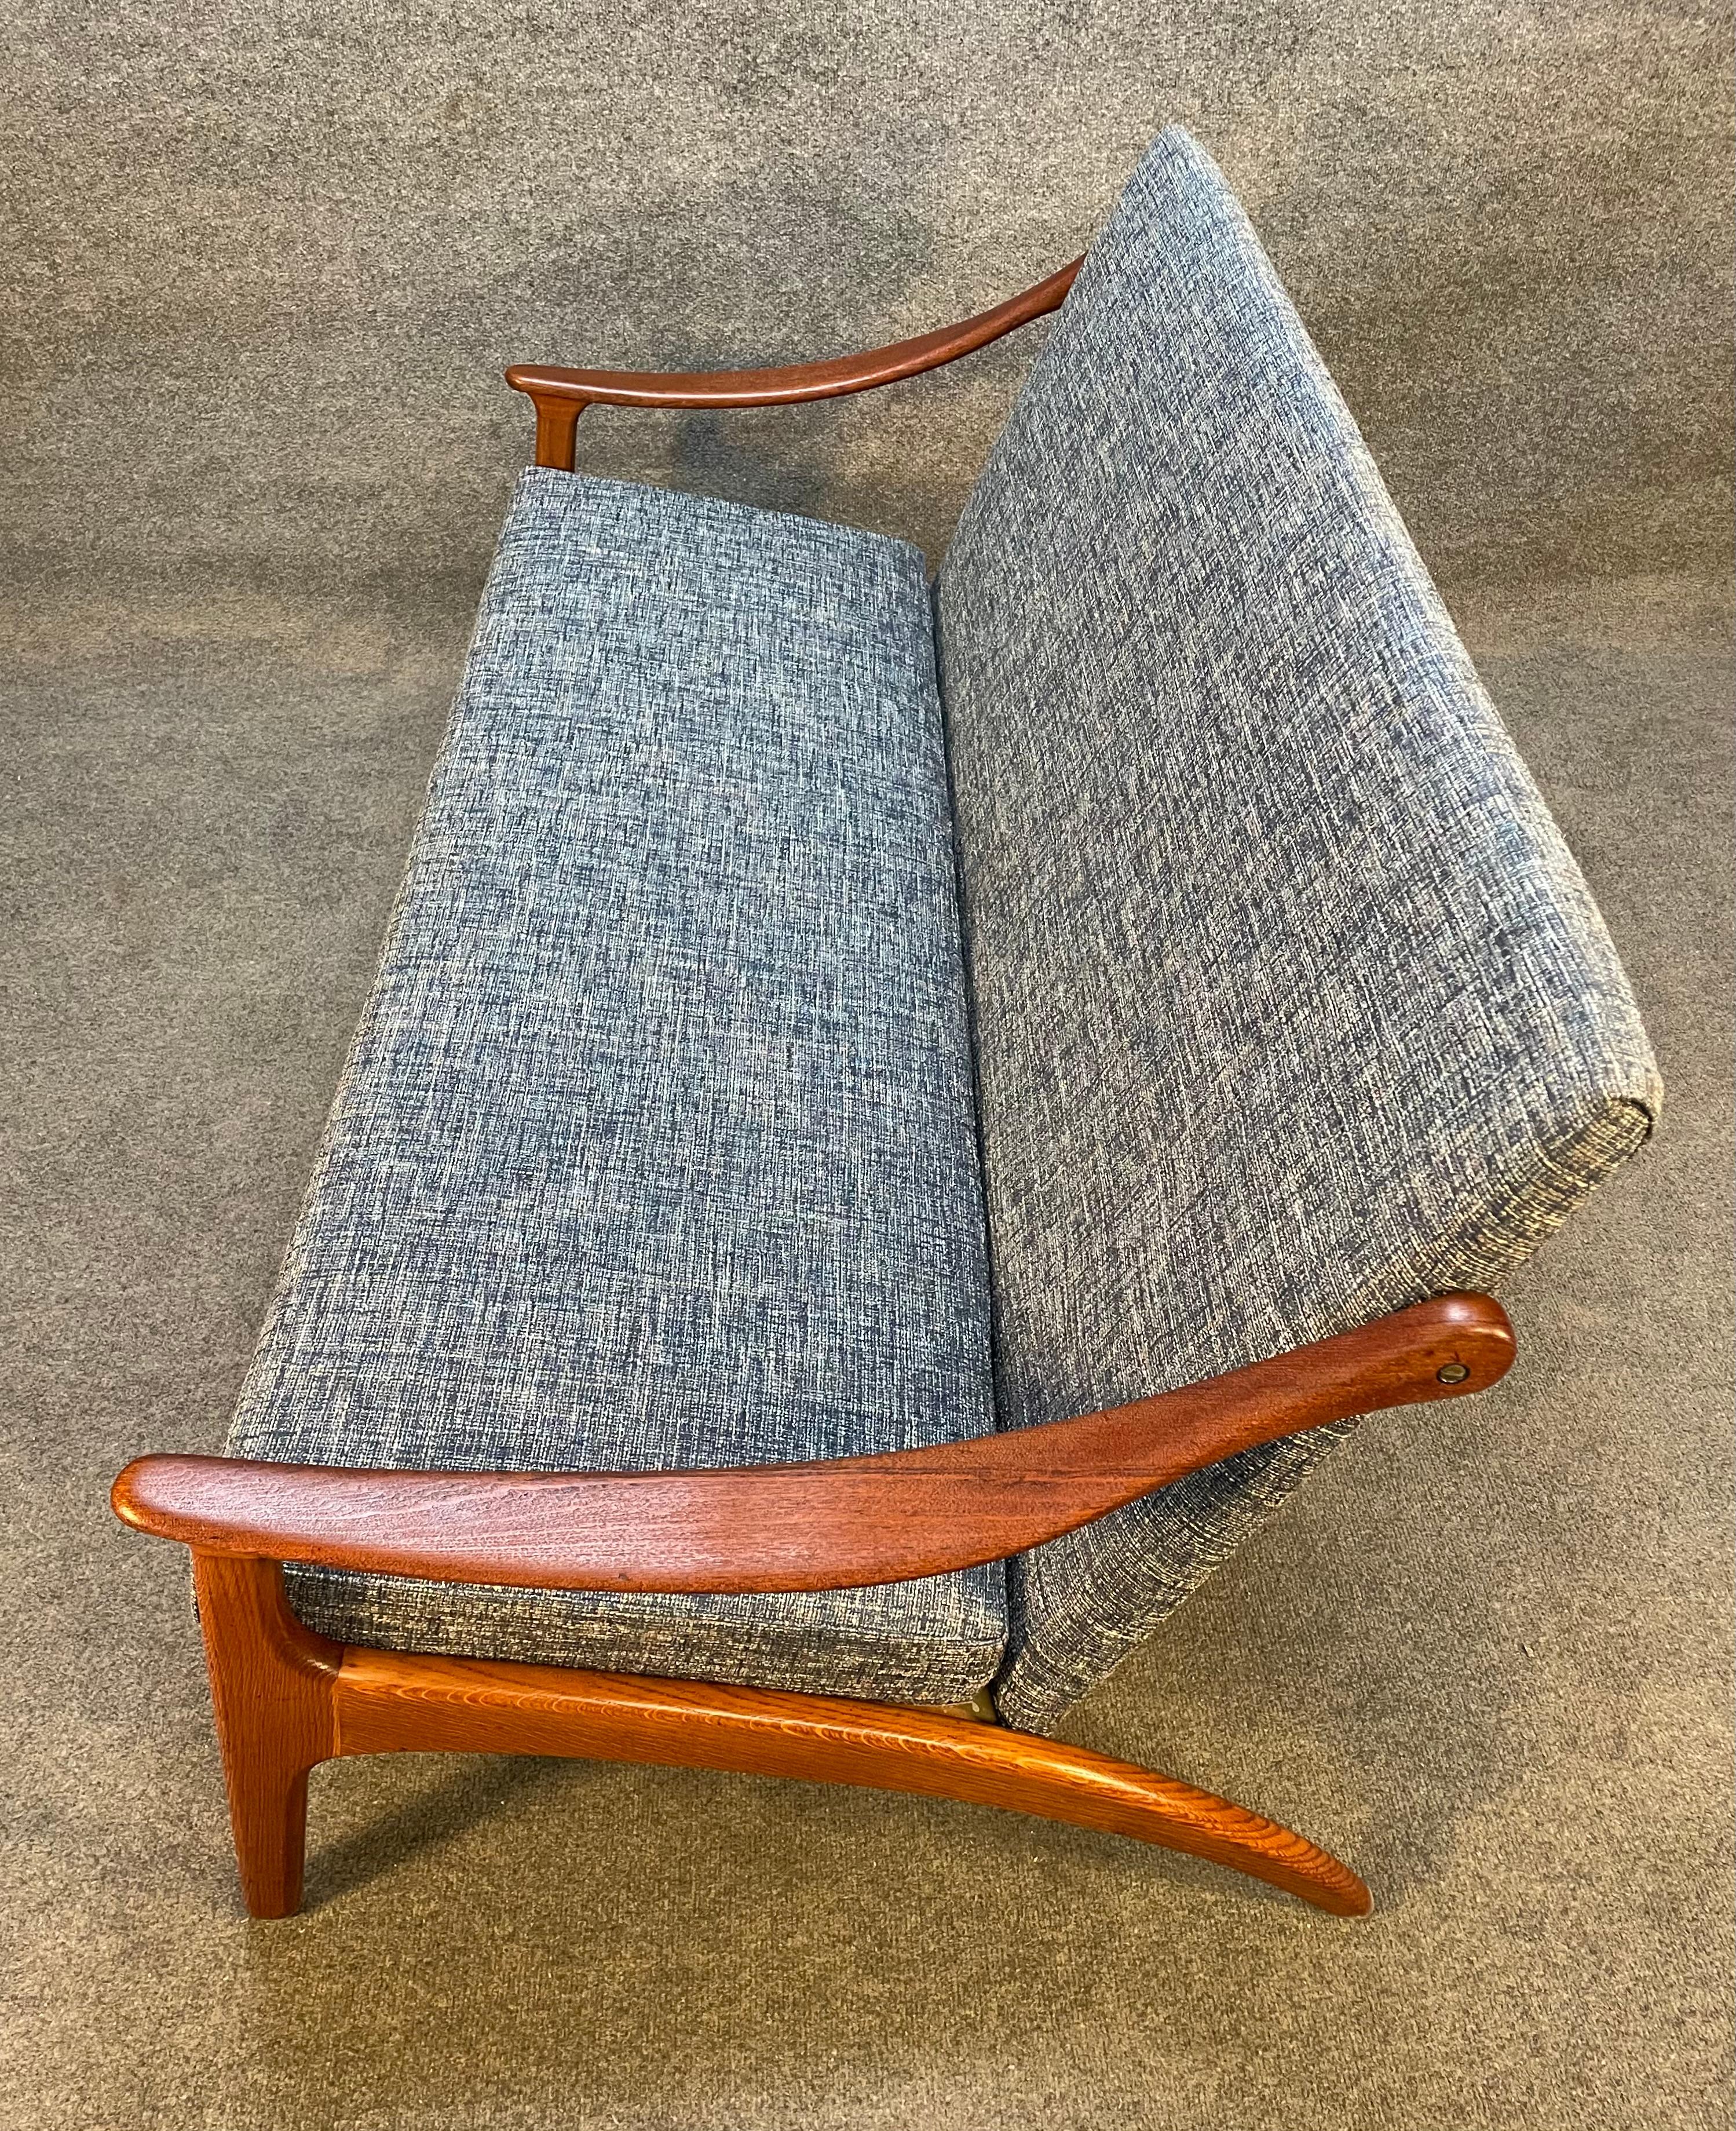 Here is a rare and beautiful Scandinavian modern settee in teak and oak designed by Arne Hovmand Olsen and manufactured by Mogens Kold in Denmark in the 1960's.
This exquisite piece, recently imported from Europe to California before its